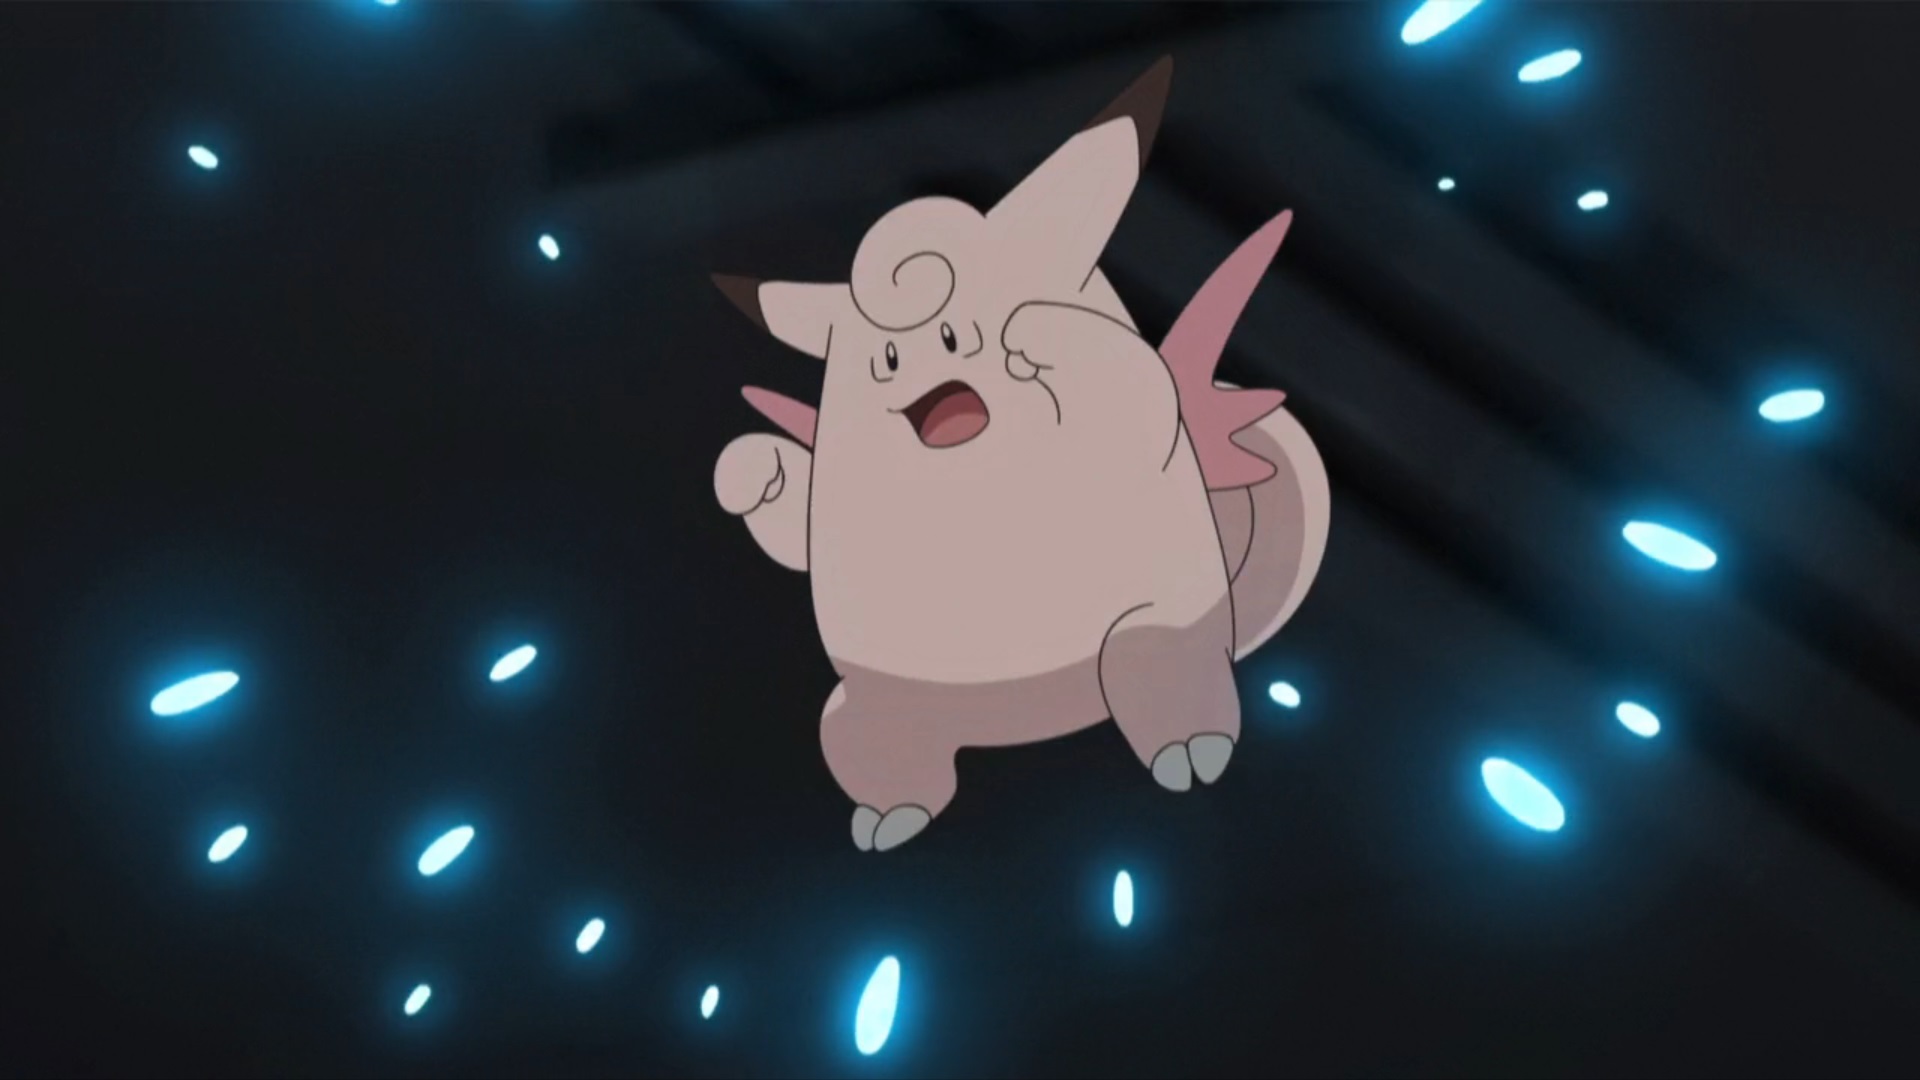 Clefable - Fairy Type Pokémon Weaknesses, Strengths and Good Pokemon to Use Against Them